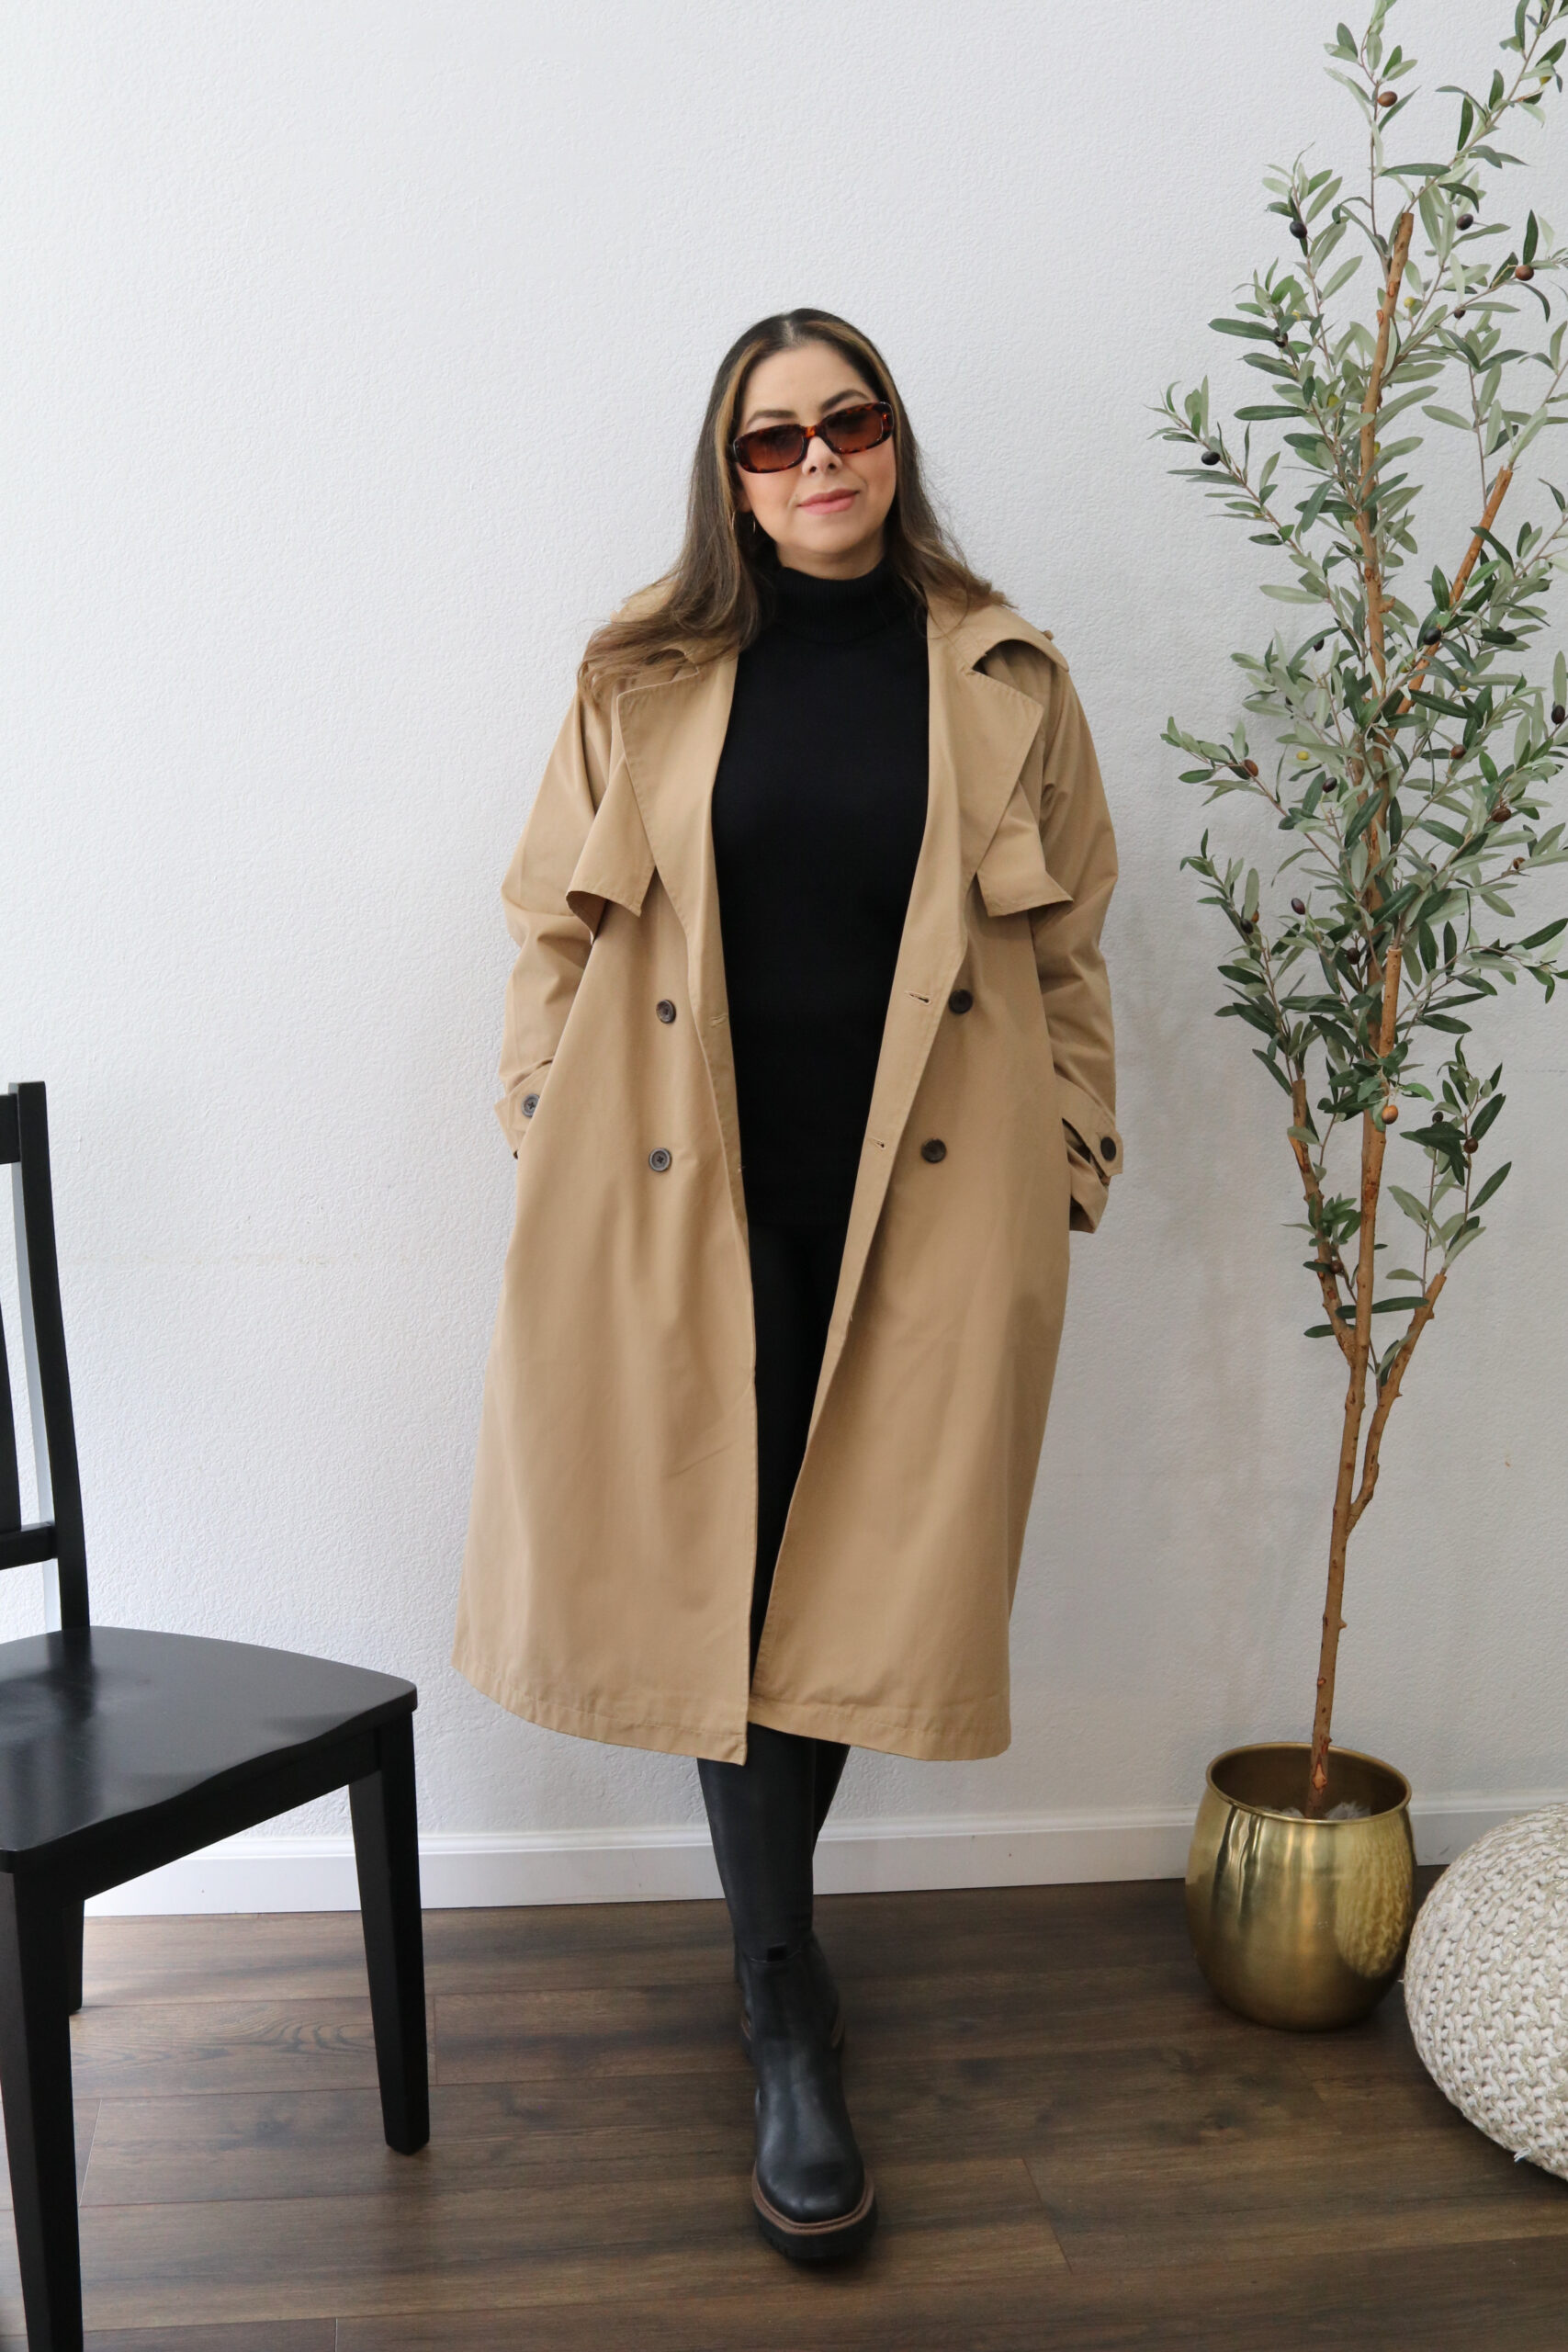 long trench coat with black leggings and boots outfit, chic chelsea boots outfit, chic trench coat outfit